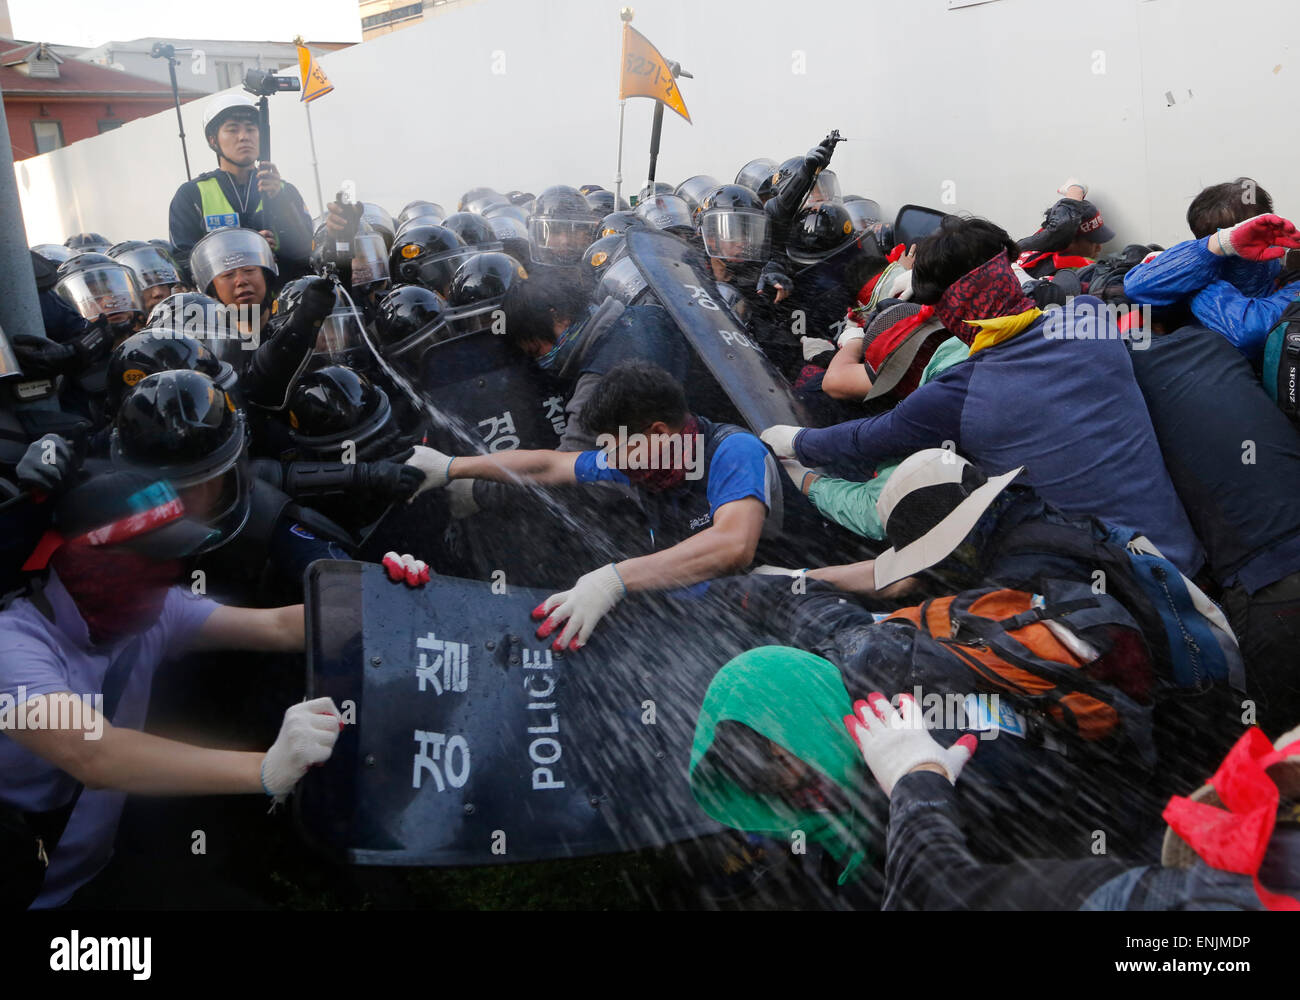 May Day protest, May 1, 2015 : Policemen use pepper spray to workers trying to march toward the presidential Blue House in Seoul, South Korea. Tens of thousands of workers held a rally on May Day in Seoul to oppose the government's plans to change the pension system for public servants and to allow more flexible labour market. They also demanded a thorough investigation into the Sewol ferry tragedy and the resignation of President Park Geun-hye. The police detained dozens of protesters. © Lee Jae-Won/AFLO/Alamy Live News Stock Photo